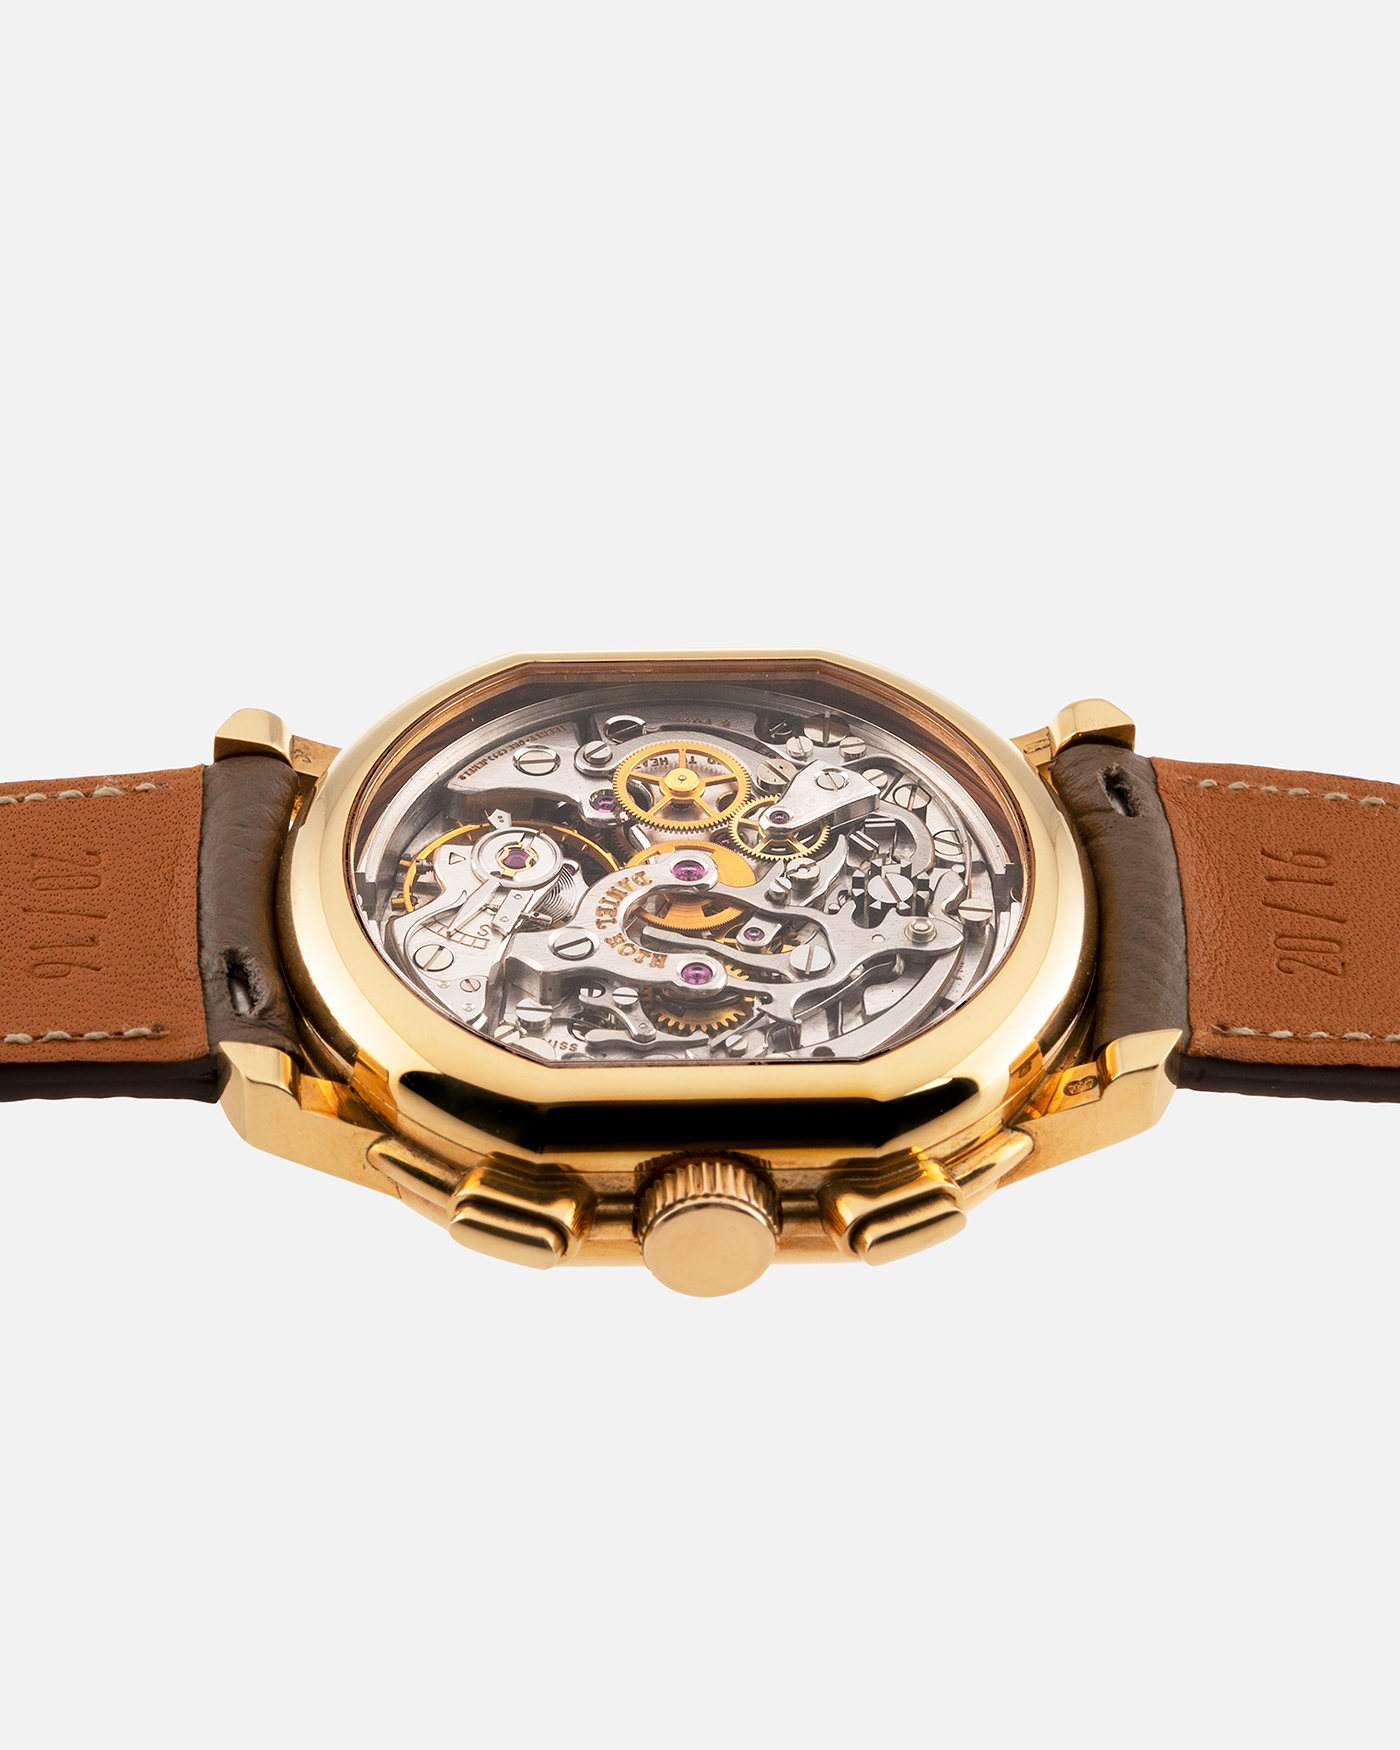 Brand: Daniel Roth Year: 1990’s Model: 2147 Material: 18k Yellow Gold Movement: Lemania 2320 Case Diameter: 35mm X 38mm Strap: Nostime Taupe Texture Calf and 18k Yellow Gold Daniel Roth Tang Buckle